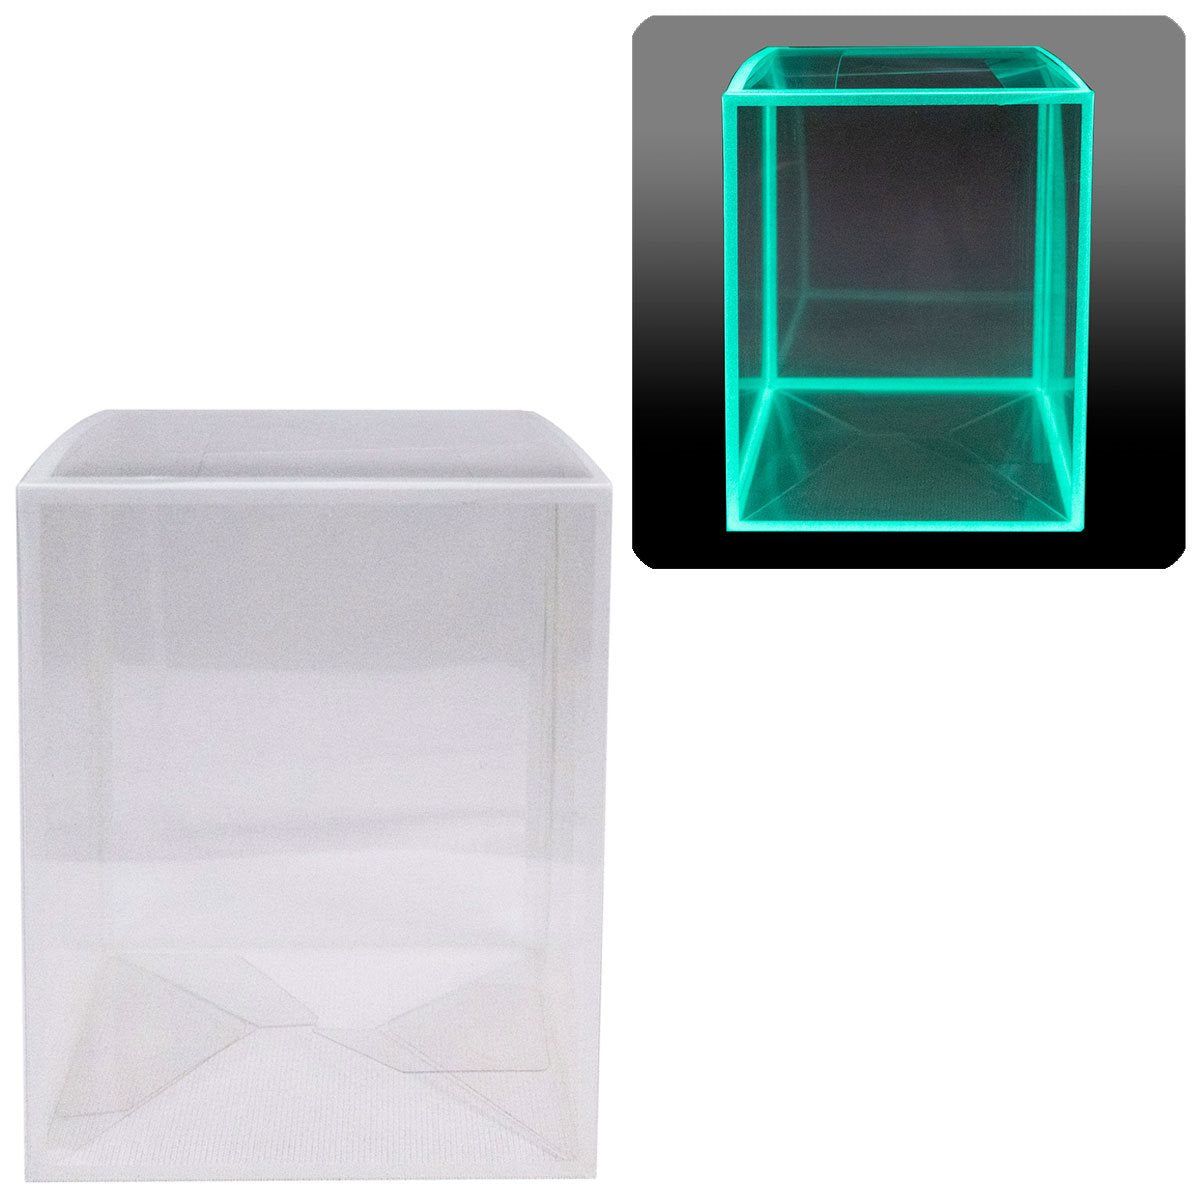 Glow-in-the-Dark Protector Box 10-Pack